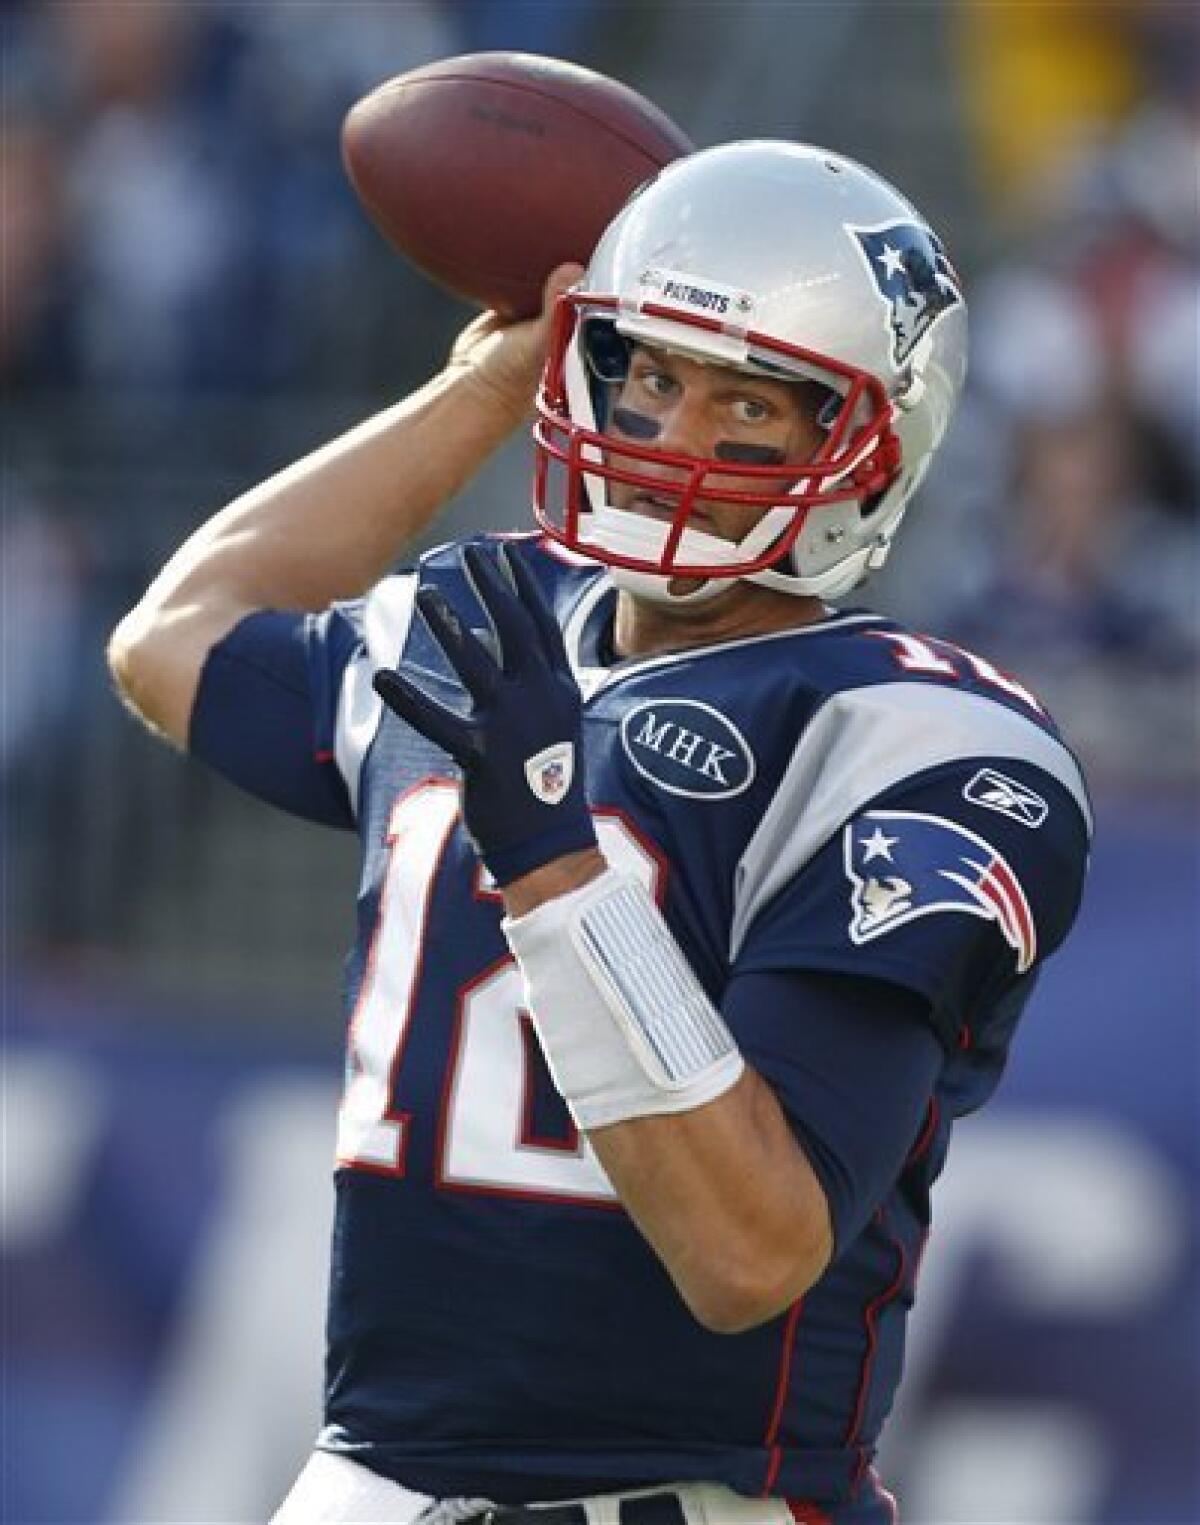 Brady stays hot, throws for 423 yards in 35-21 win - The San Diego